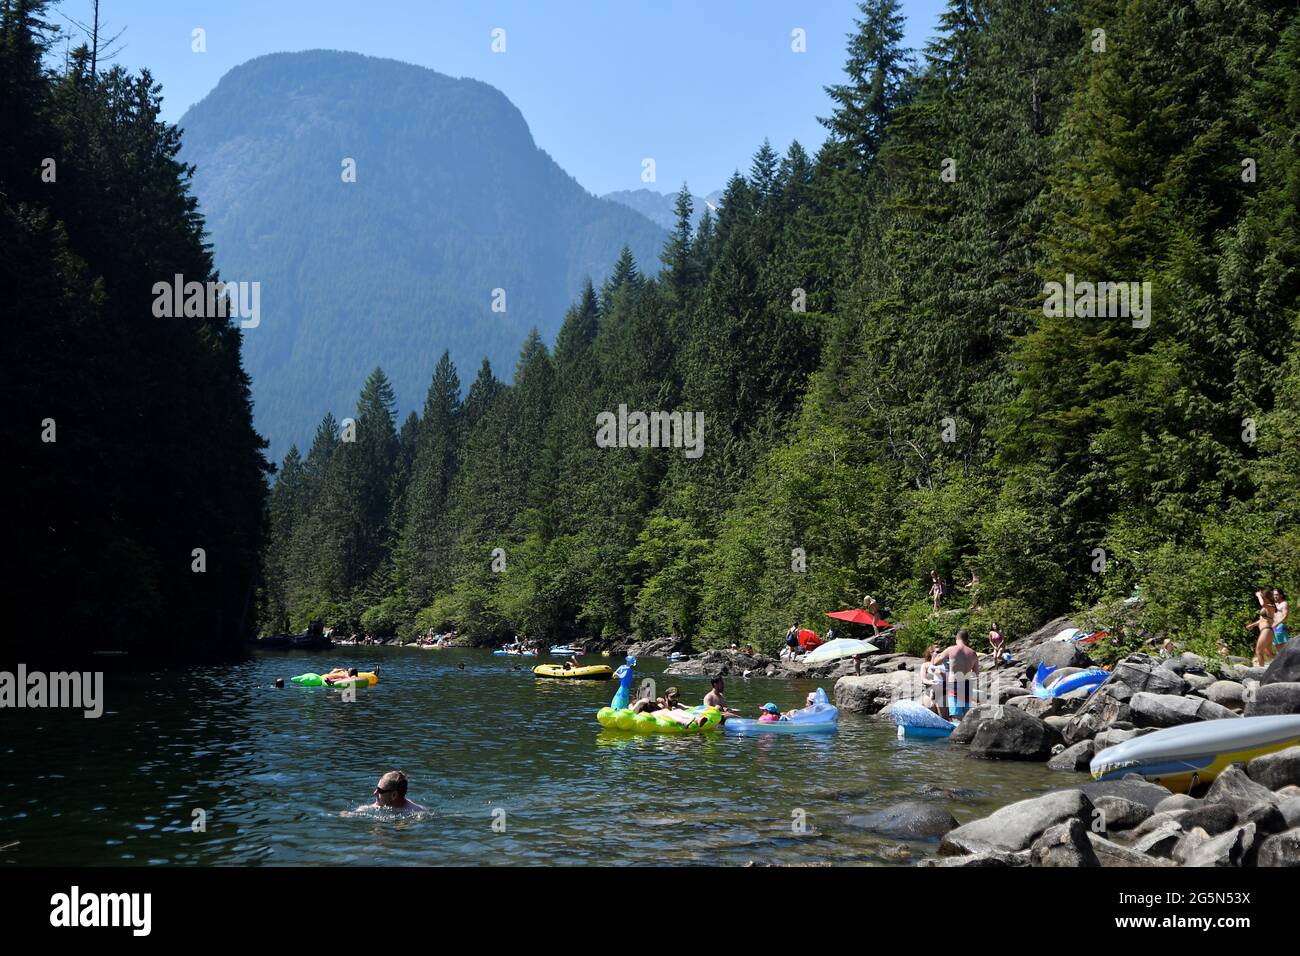 People cool off in Alouette Lake during the scorching weather of a heatwave in Maple Ridge, British Columbia, Canada June 28, 2021. REUTERS/Jennifer Gauthier Stock Photo